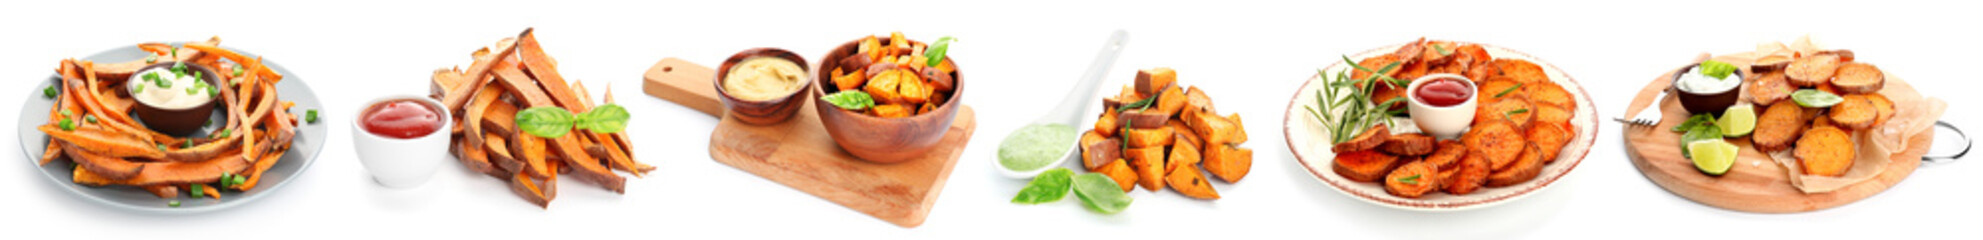 Group of tasty prepared sweet potatoes with spices and sauces on white background